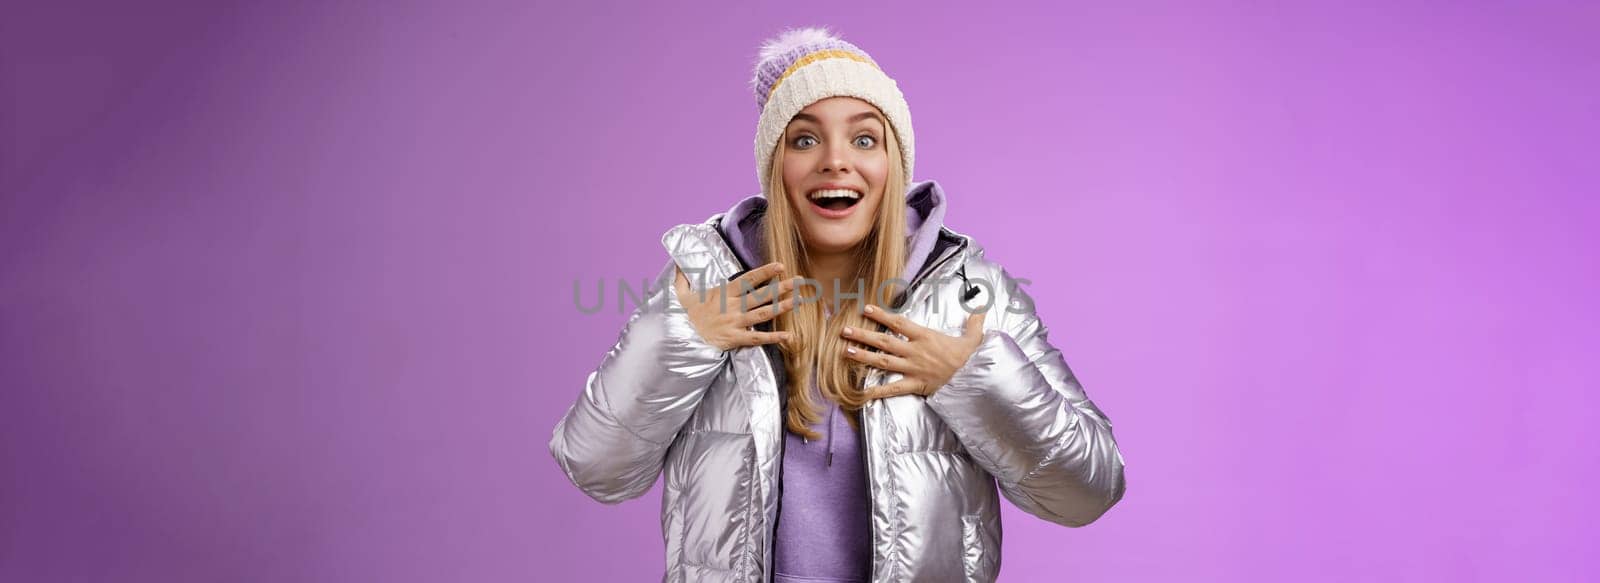 Grateful delighted young surprised girl receive unexpectedly good news feel lucky thrilled pointing herself press palms chest thankful smiling amused gasping speechless triumphing, purple background.